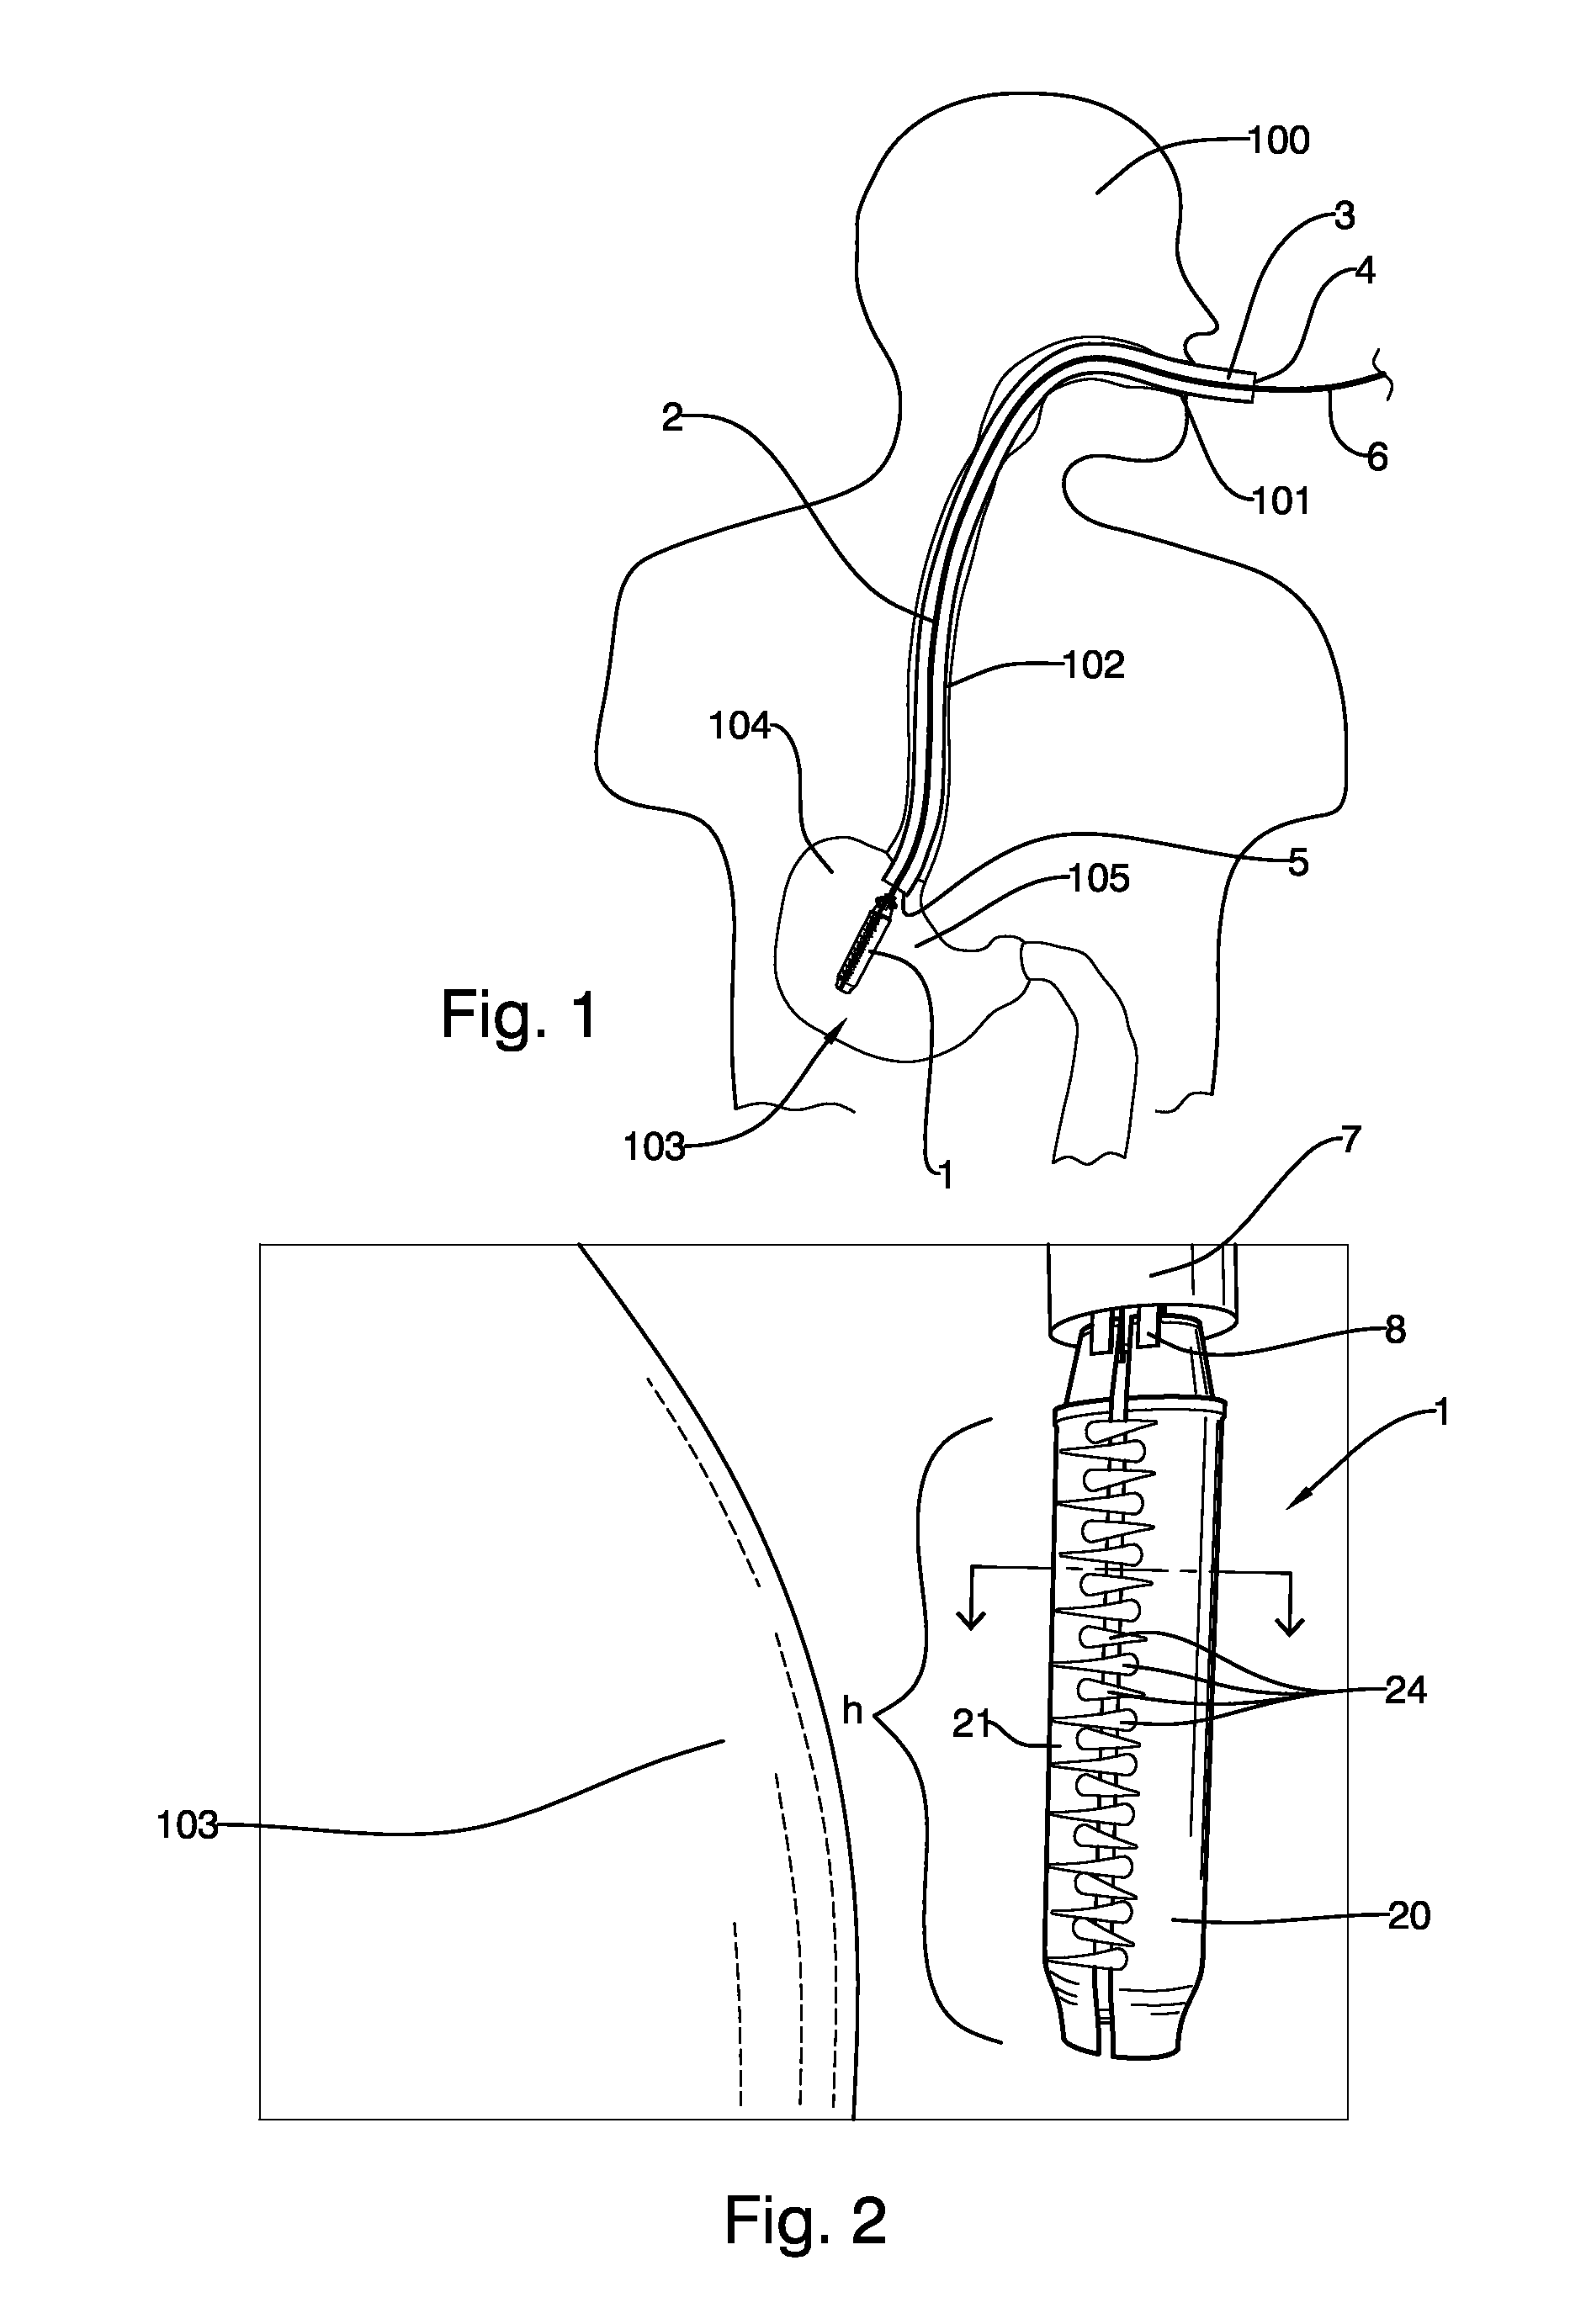 Endoscopic implantable device and method for the apposition of the stomach walls for reducing the stomach internal volume in a weight loss surgery procedure